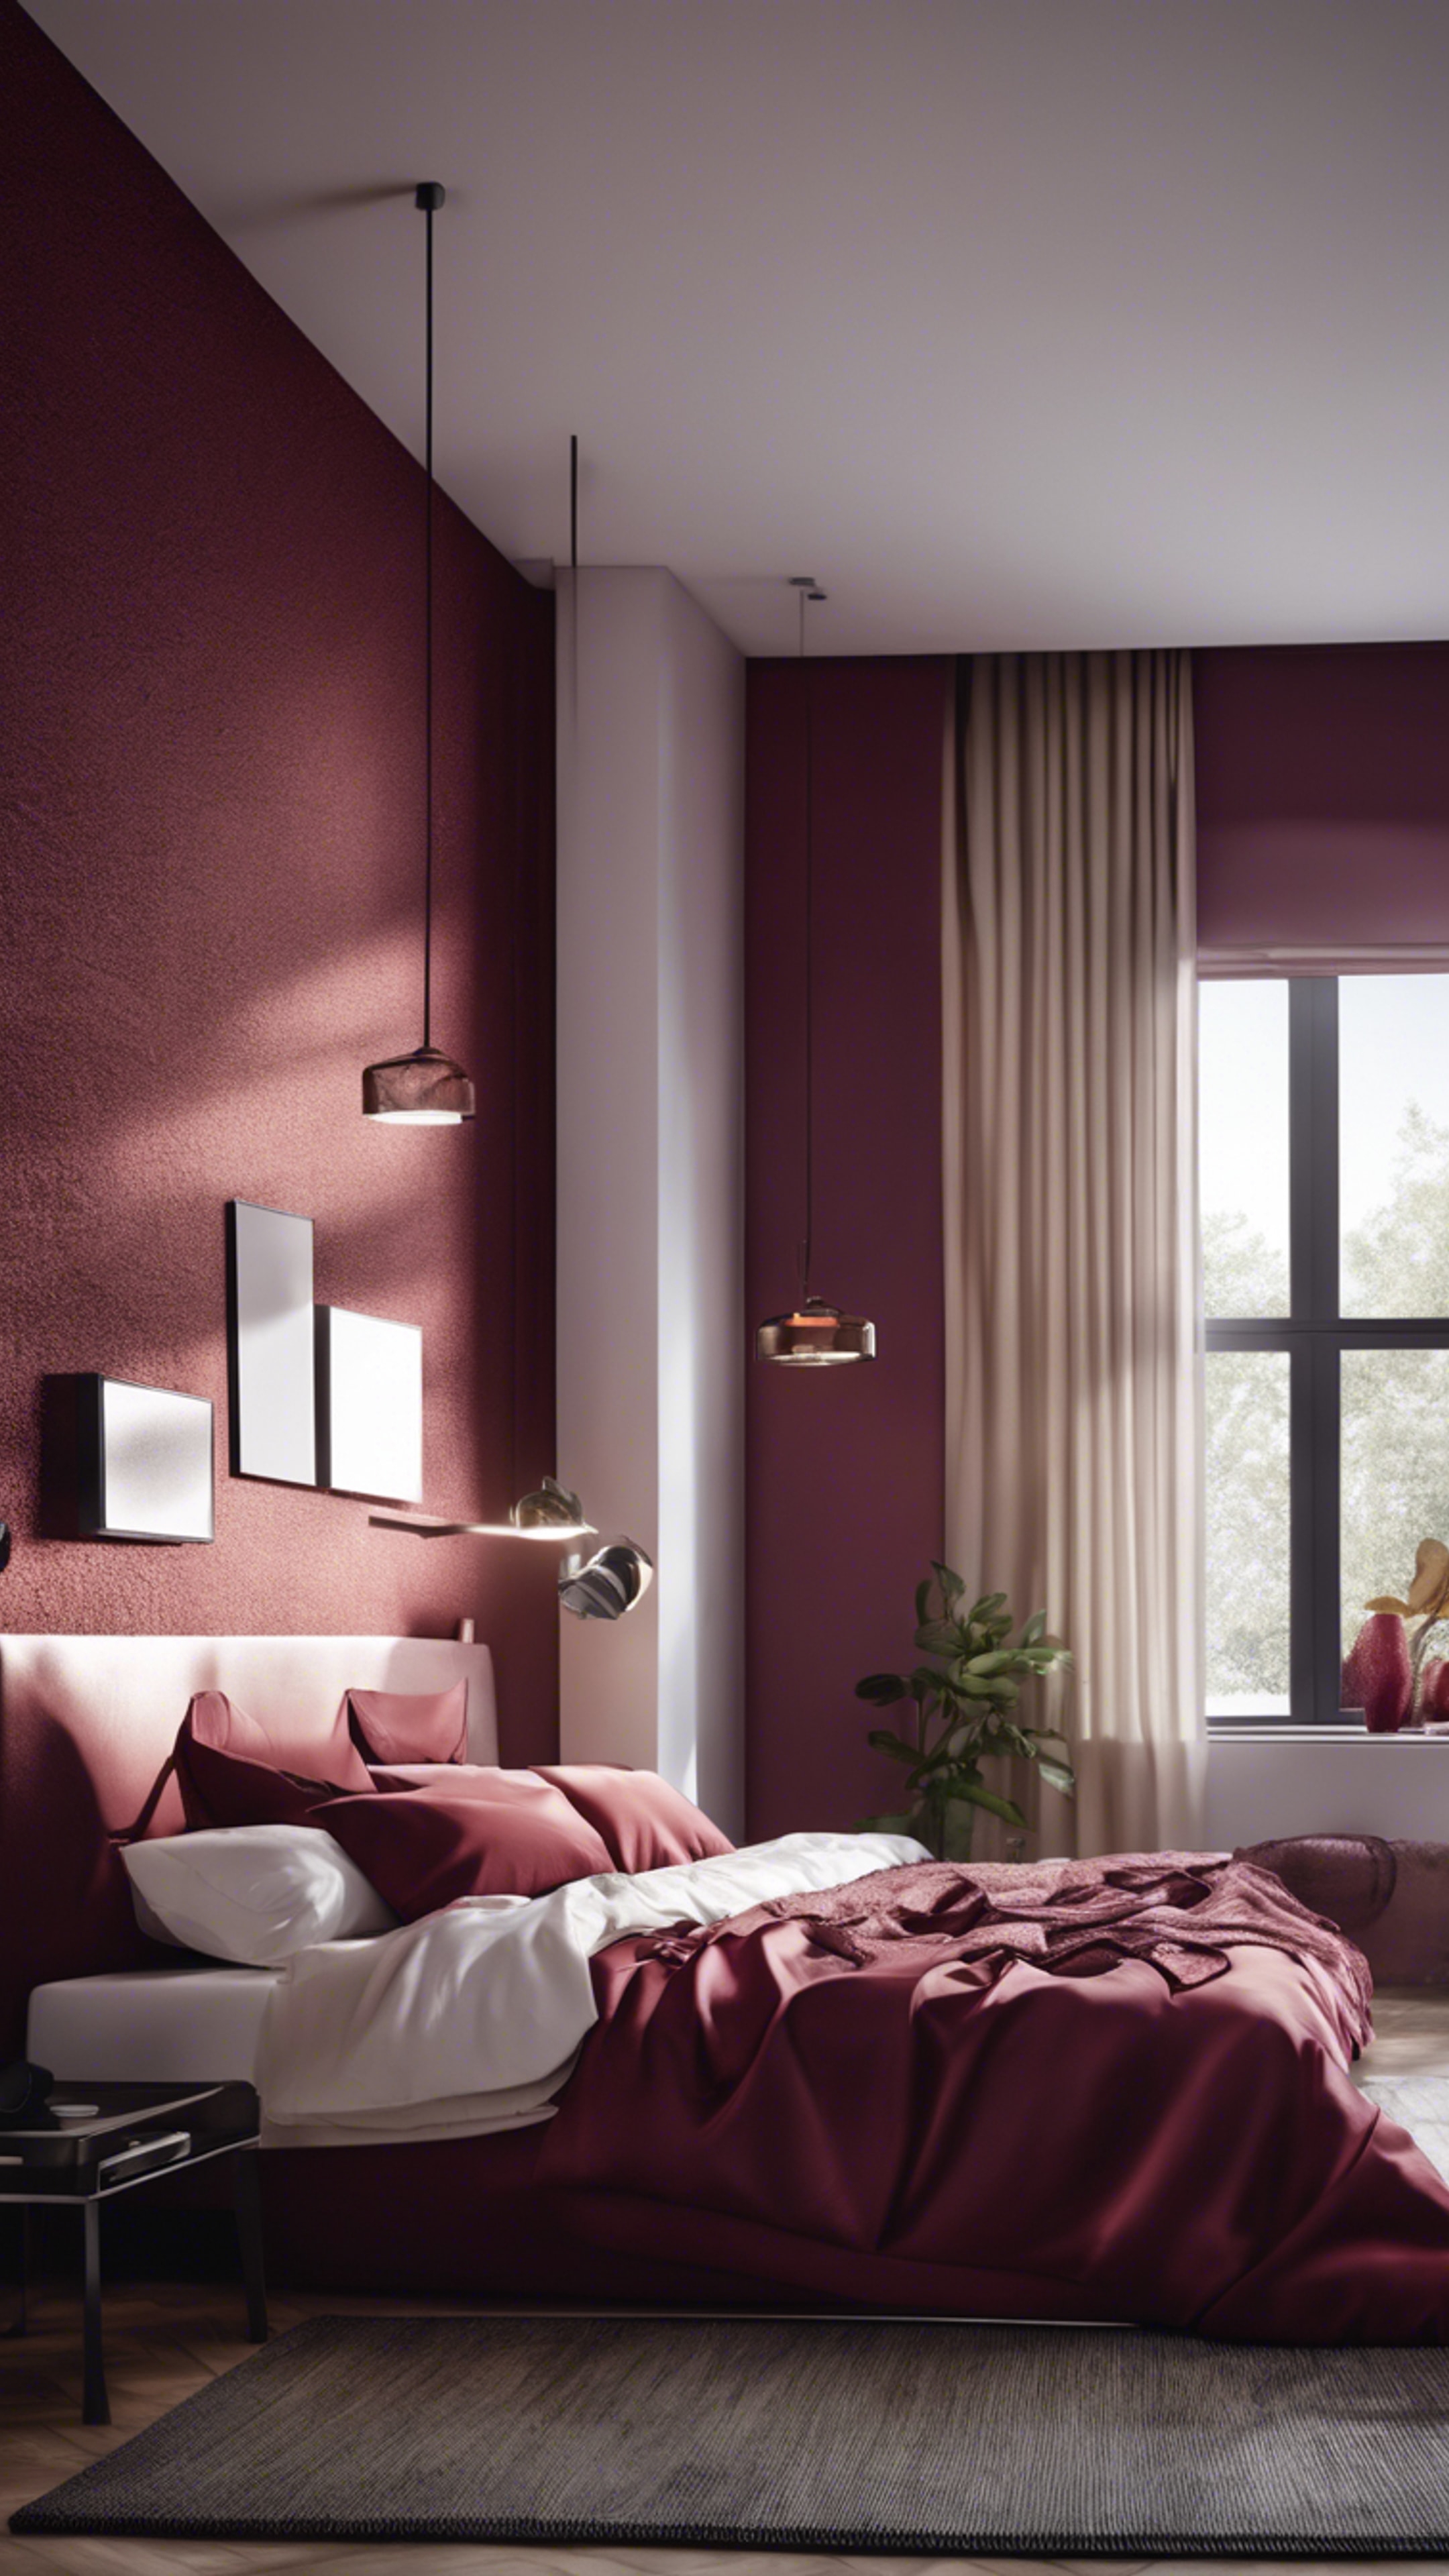 A burgundy-themed modern bedroom with cozy bedding, indirect cool lighting, and minimalistic furniture. Wallpaper[30fdfe407a0f47dfb9b1]